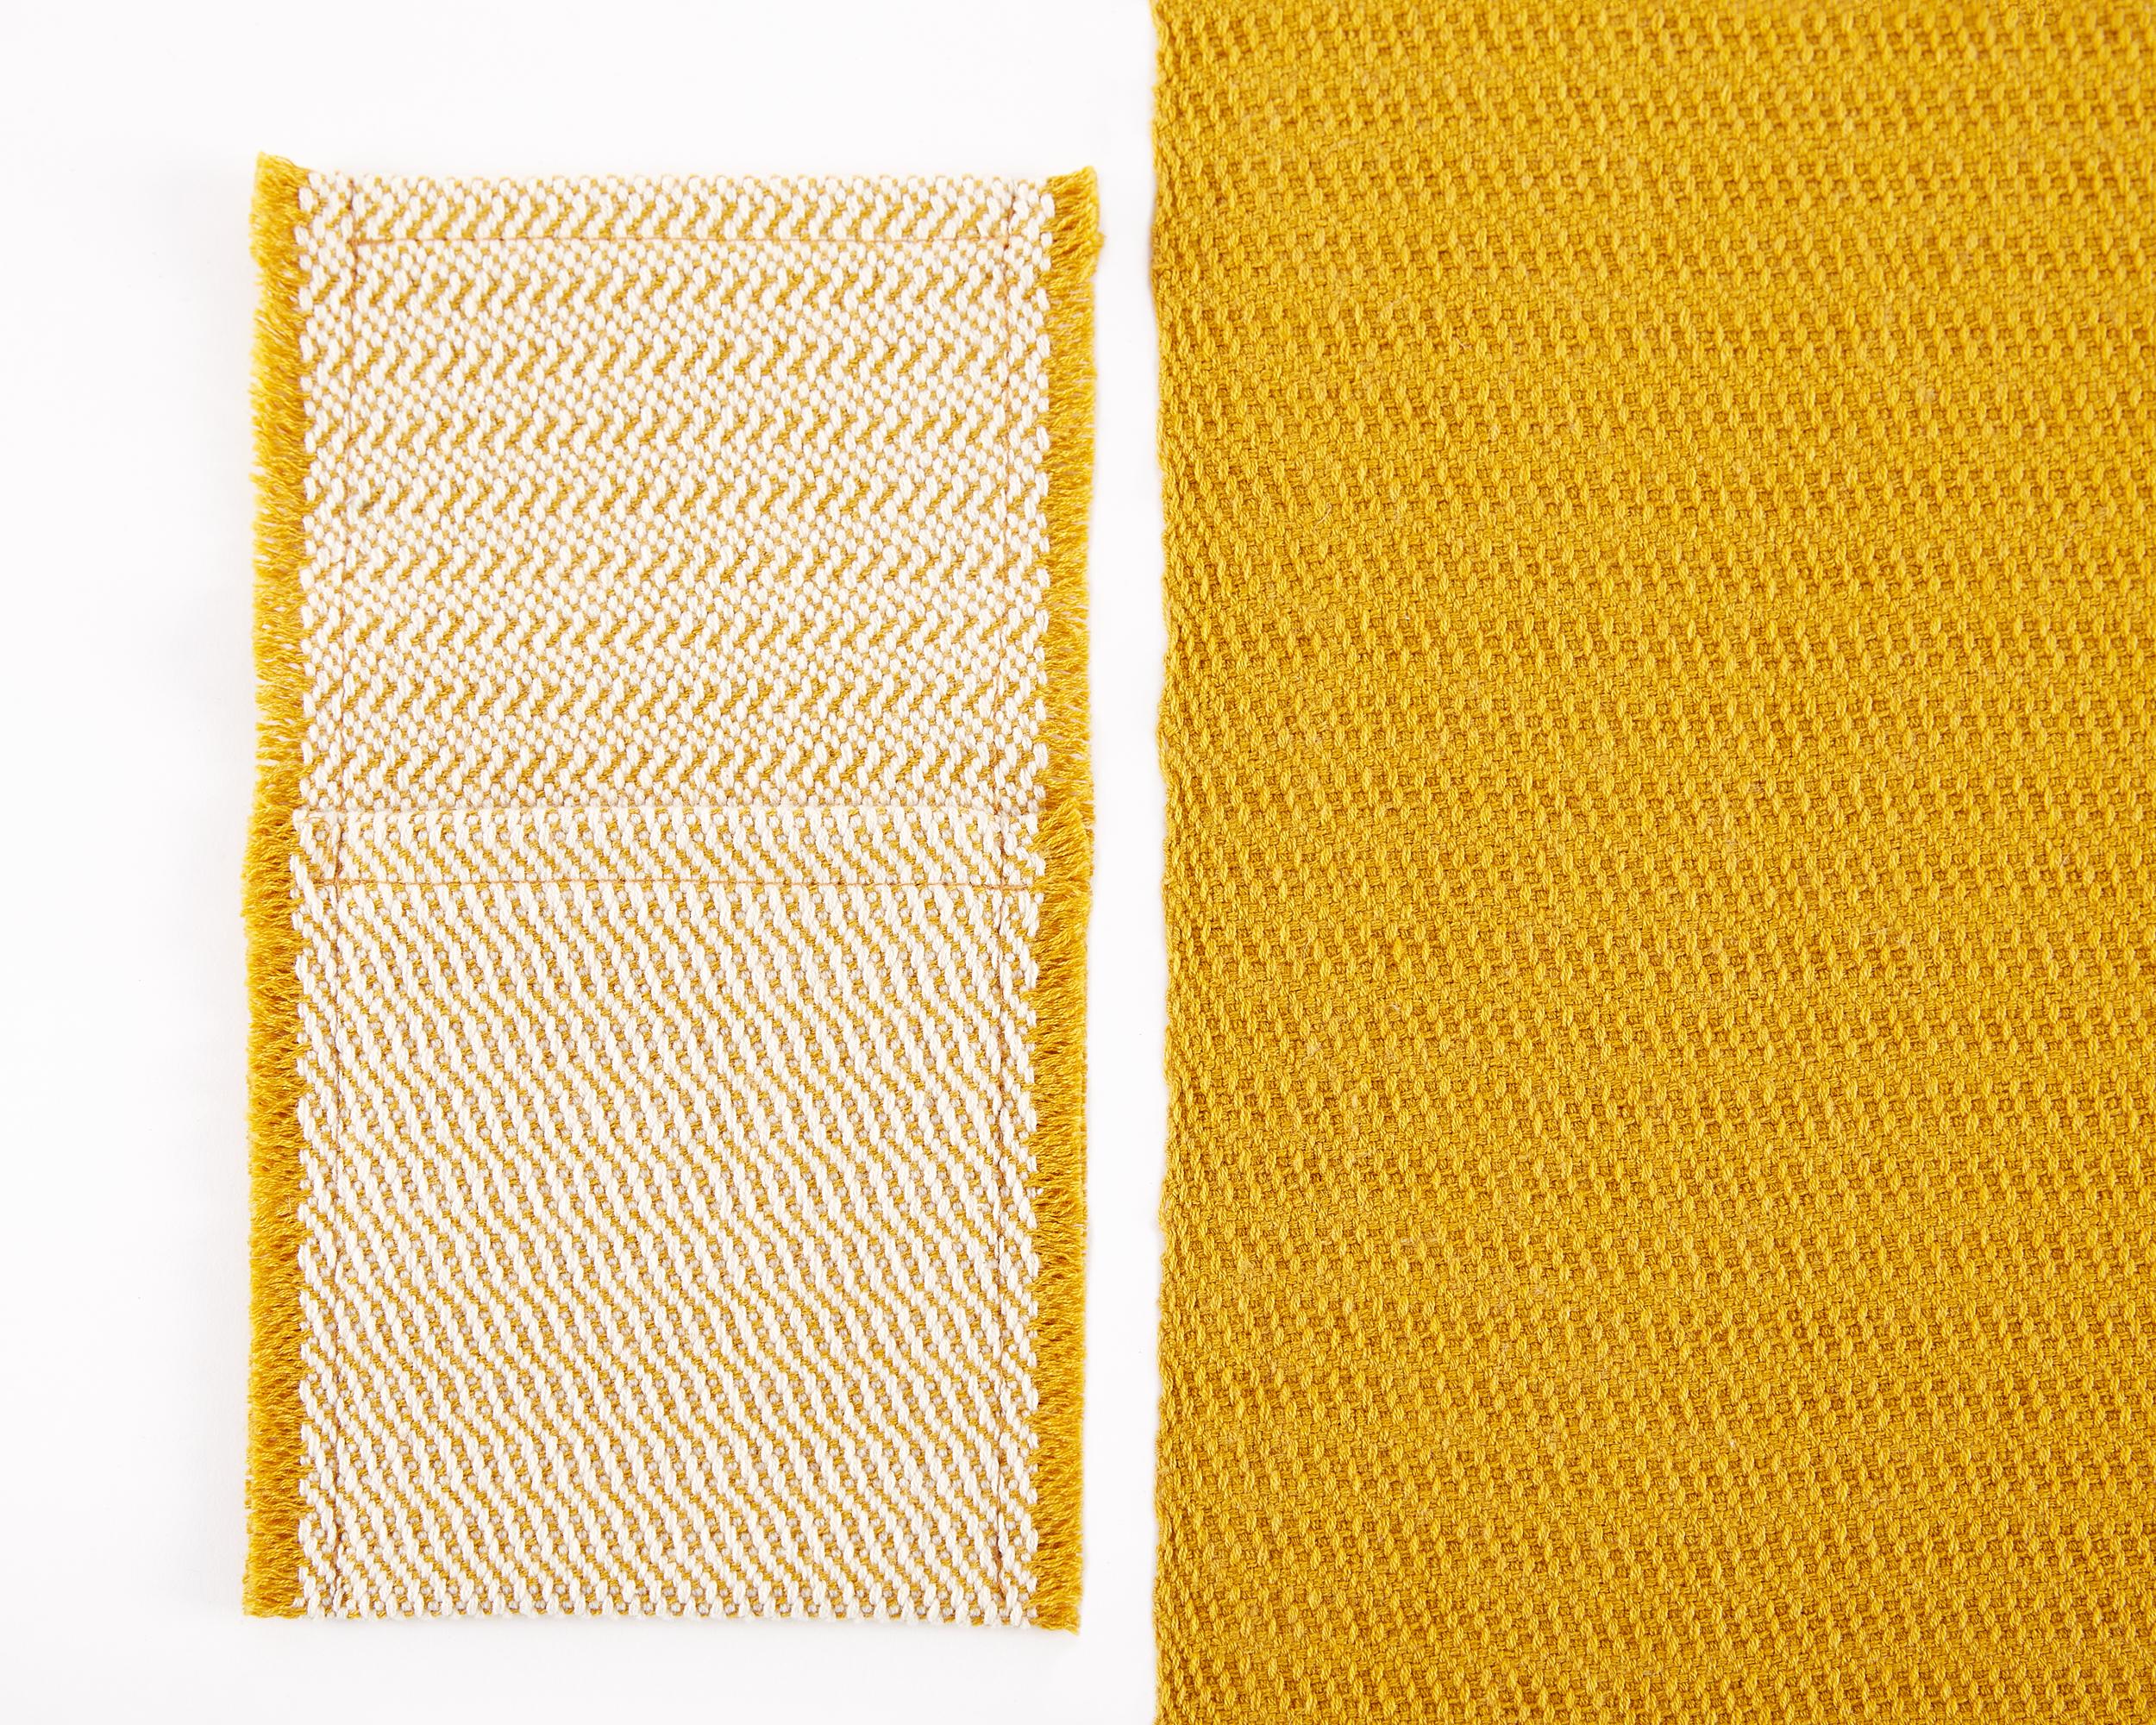 The Yellow Placemat Set is part of our newest homeware collection. The fabric is all handwoven made out of cotton. This set is perfect to create a pop of color with you decor or just to make your table look very fun. Shop it now.